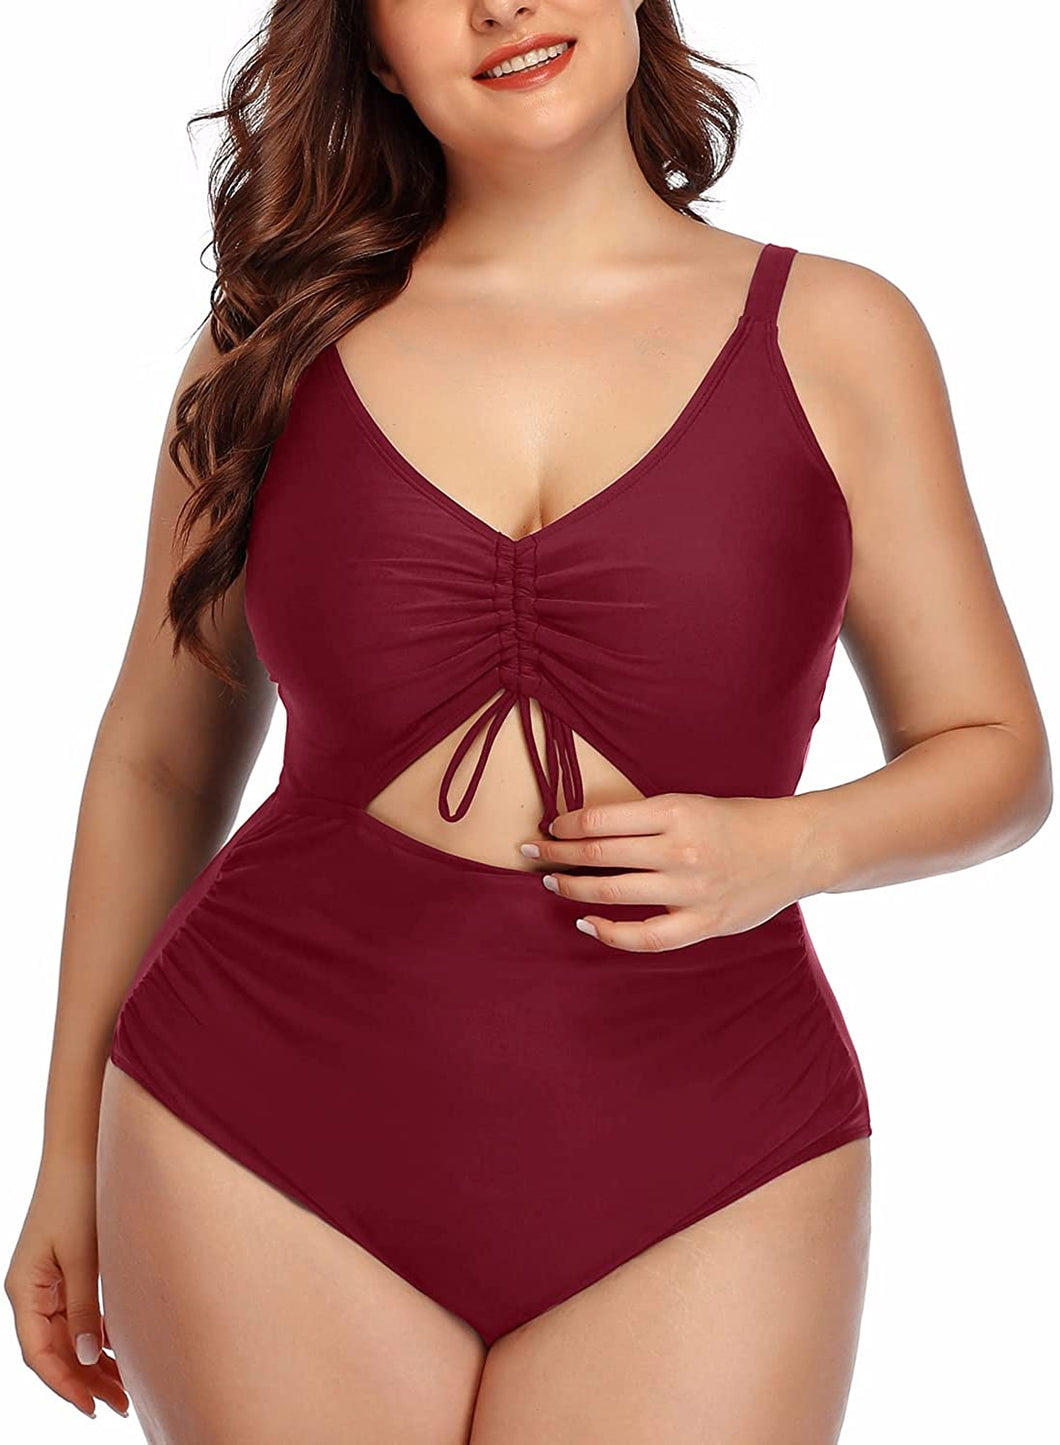 One Piece High Waisted Red Monokini Plus Size Swimsuit